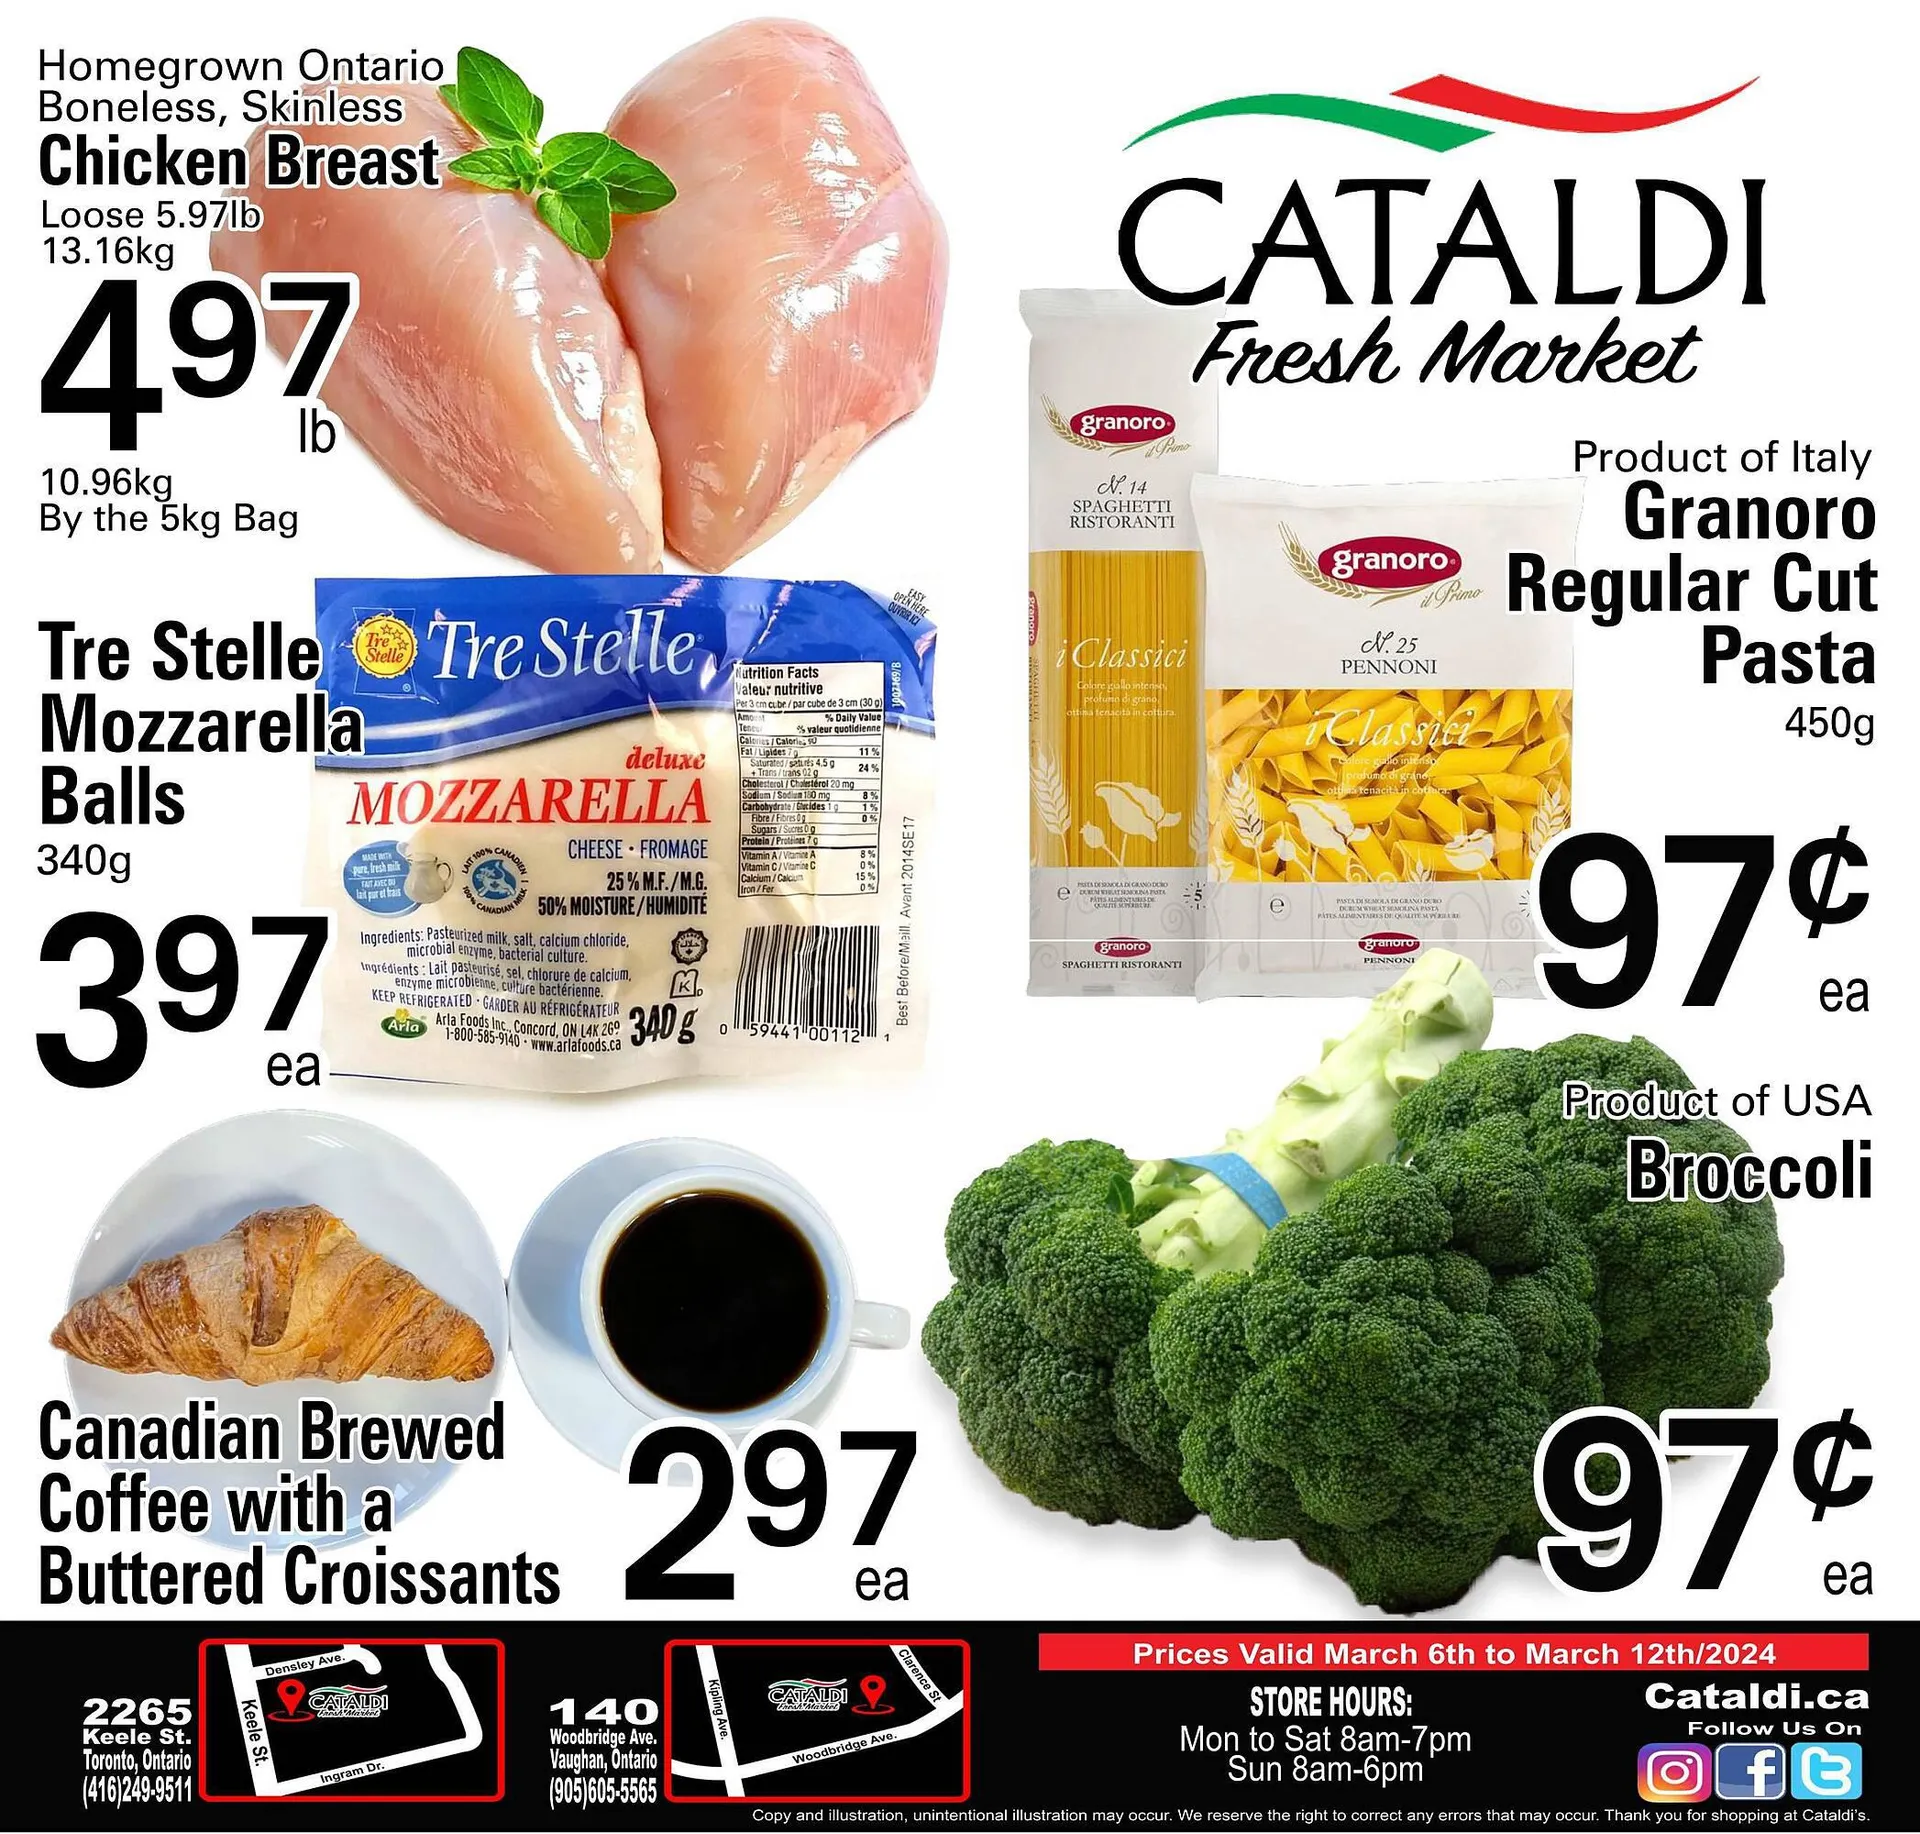 Cataldi Fresh Market flyer from March 6 to March 12 2024 - flyer page 